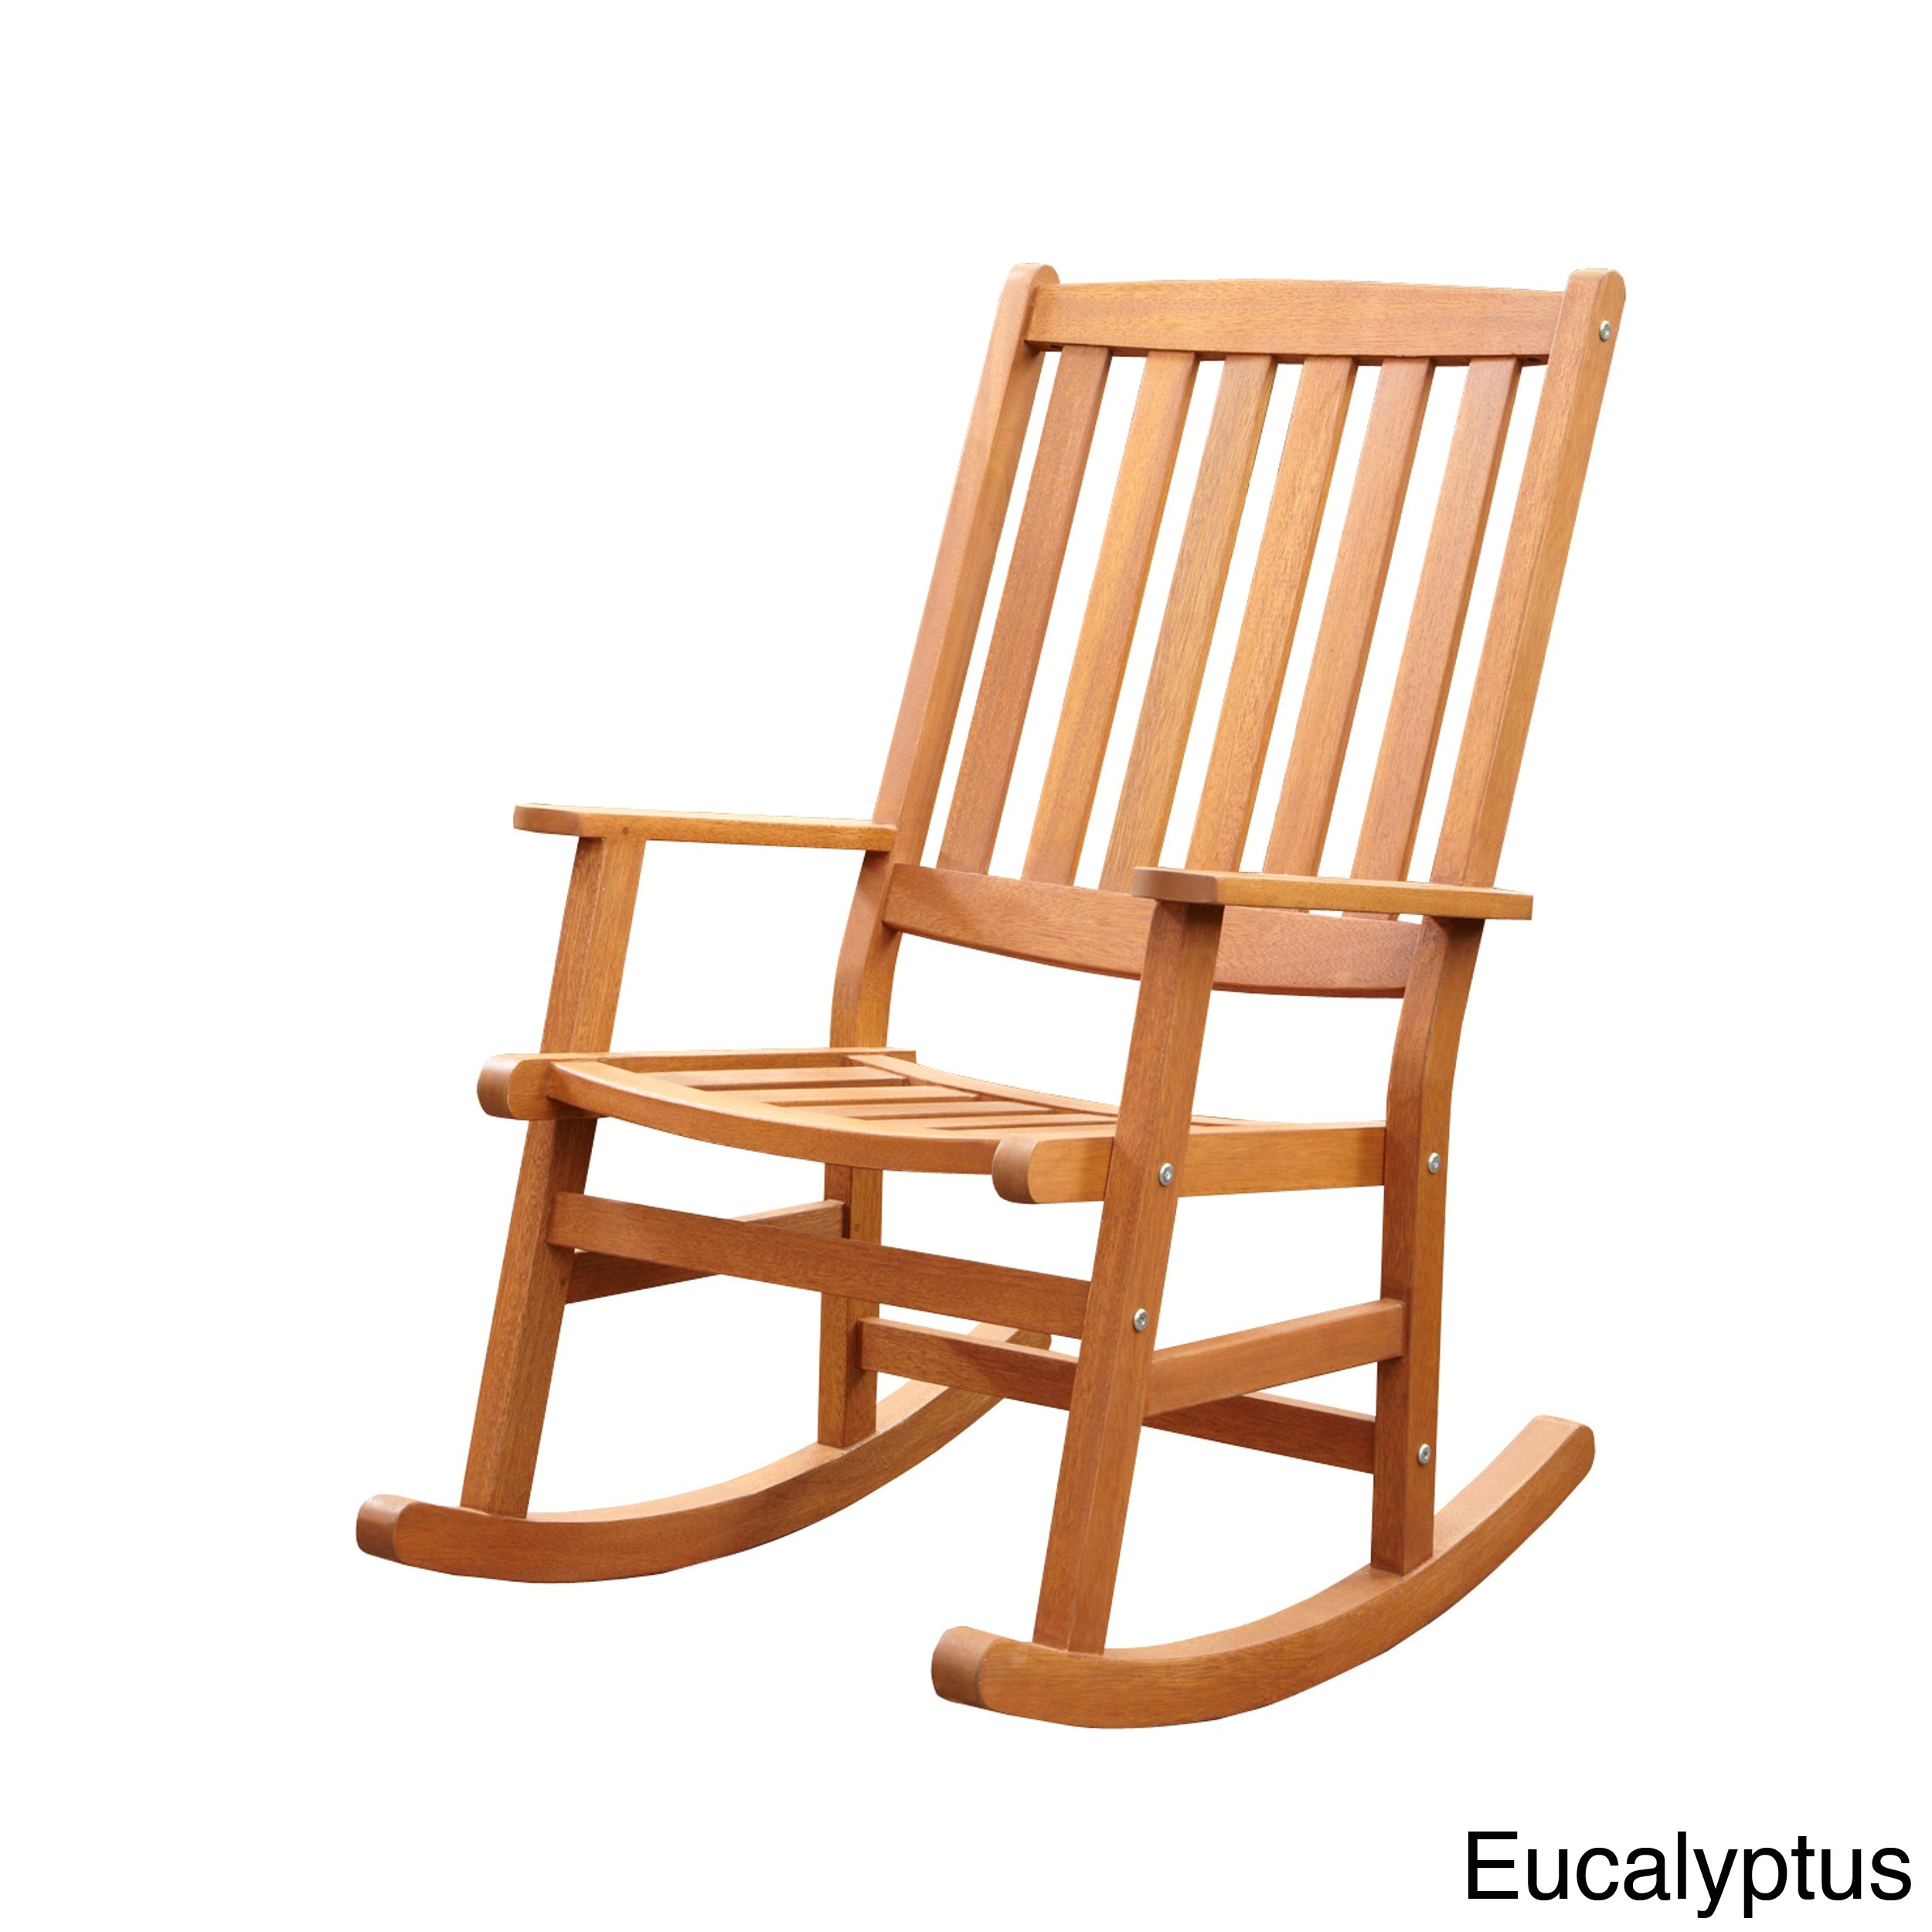 cracker barrel rocking chair reviews home interior design chairs furniture fascinating images